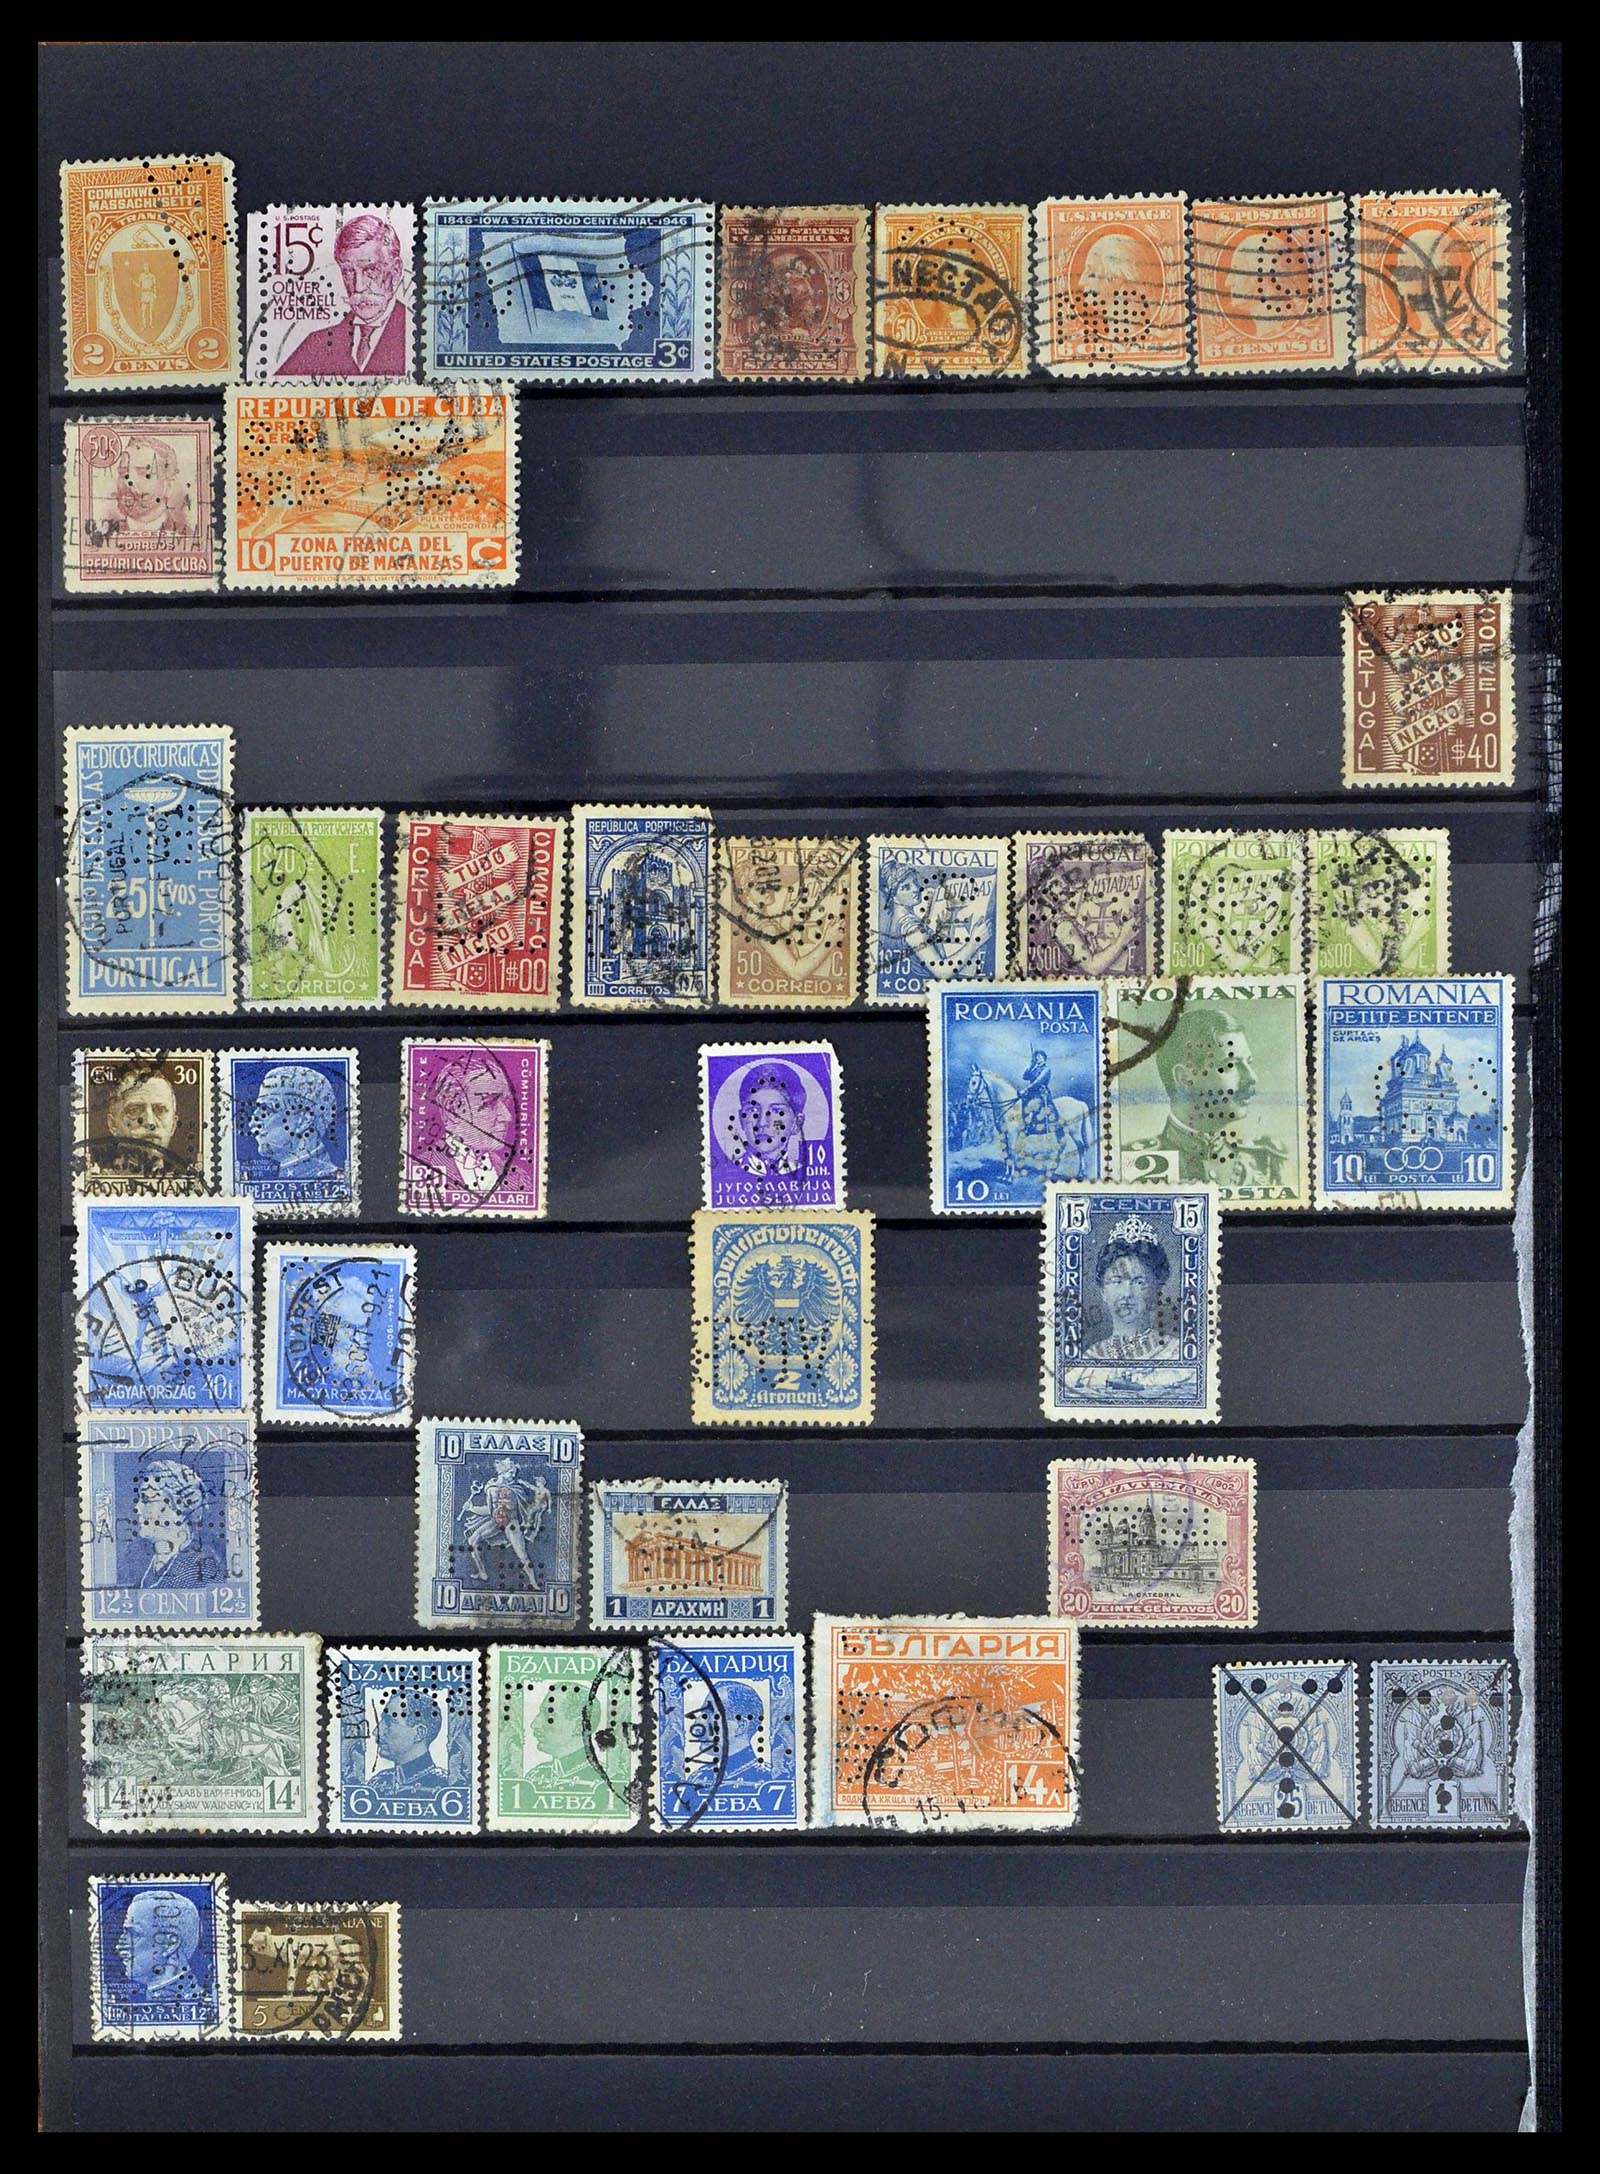 39196 0137 - Stamp collection 39196 Great Britain 1844-1955.